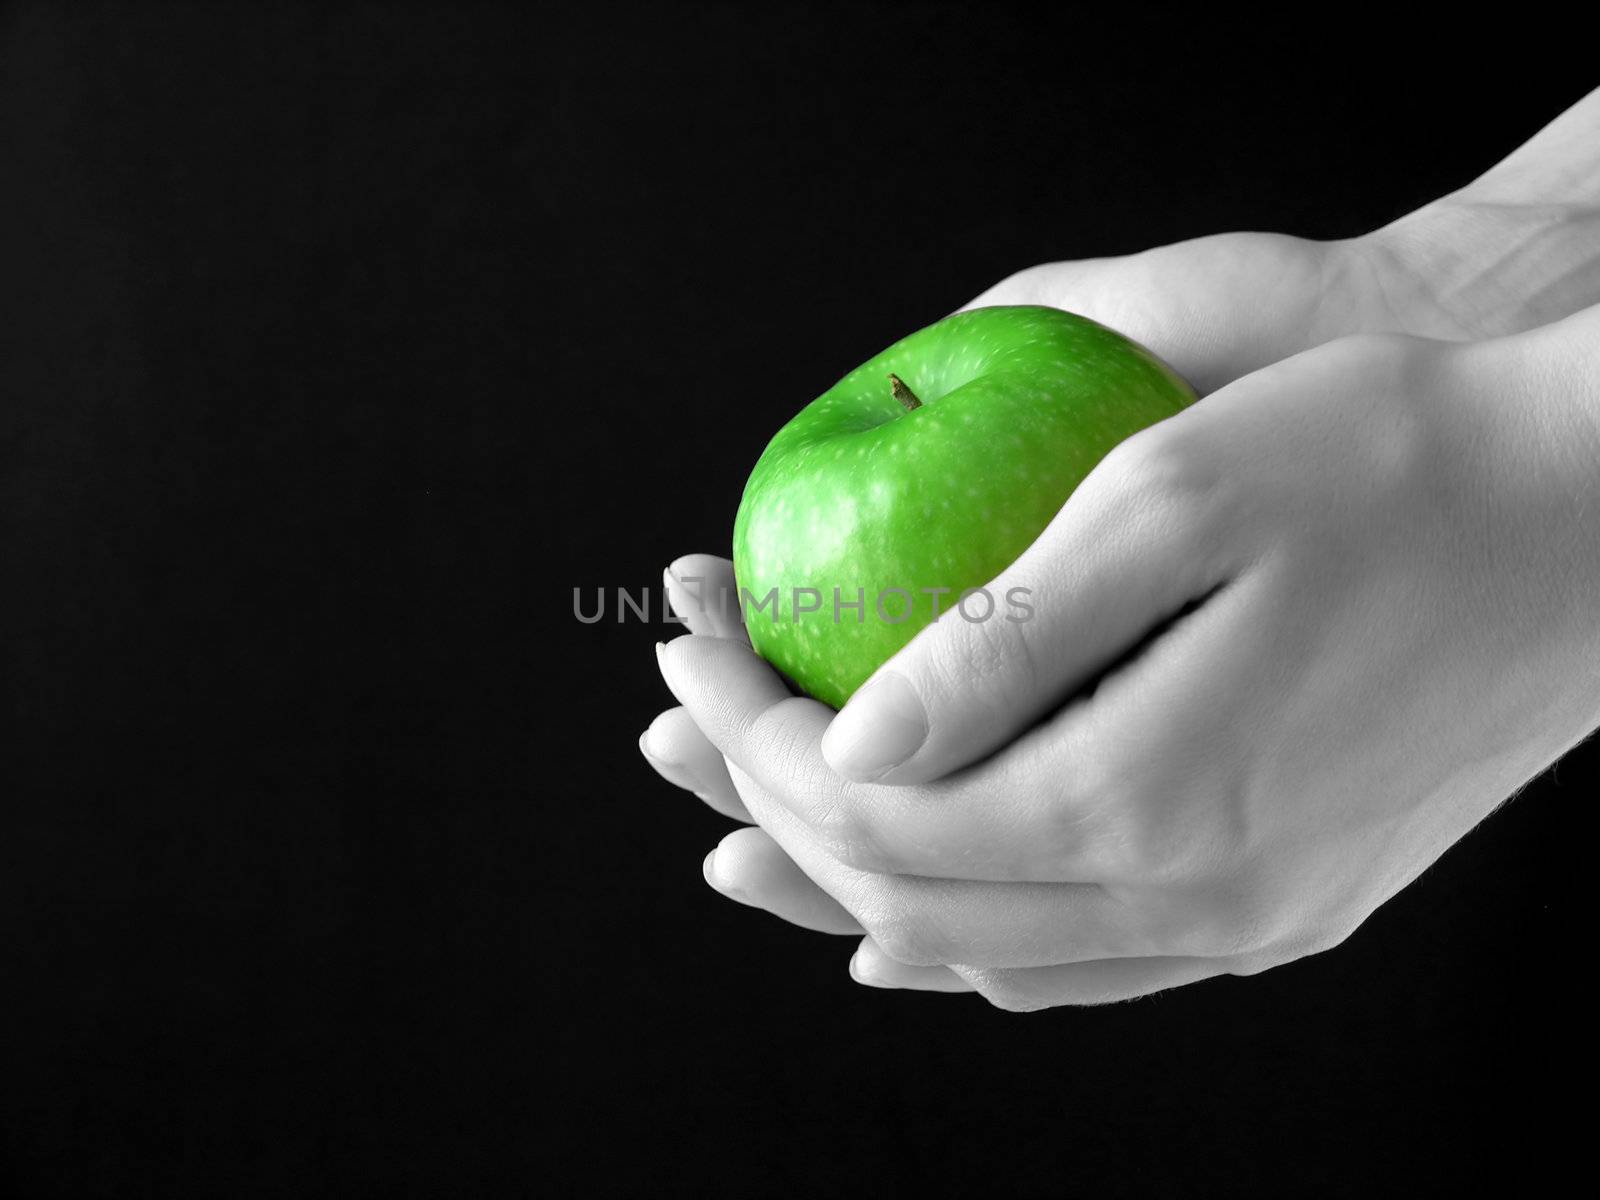 Green Apple in hands on black background